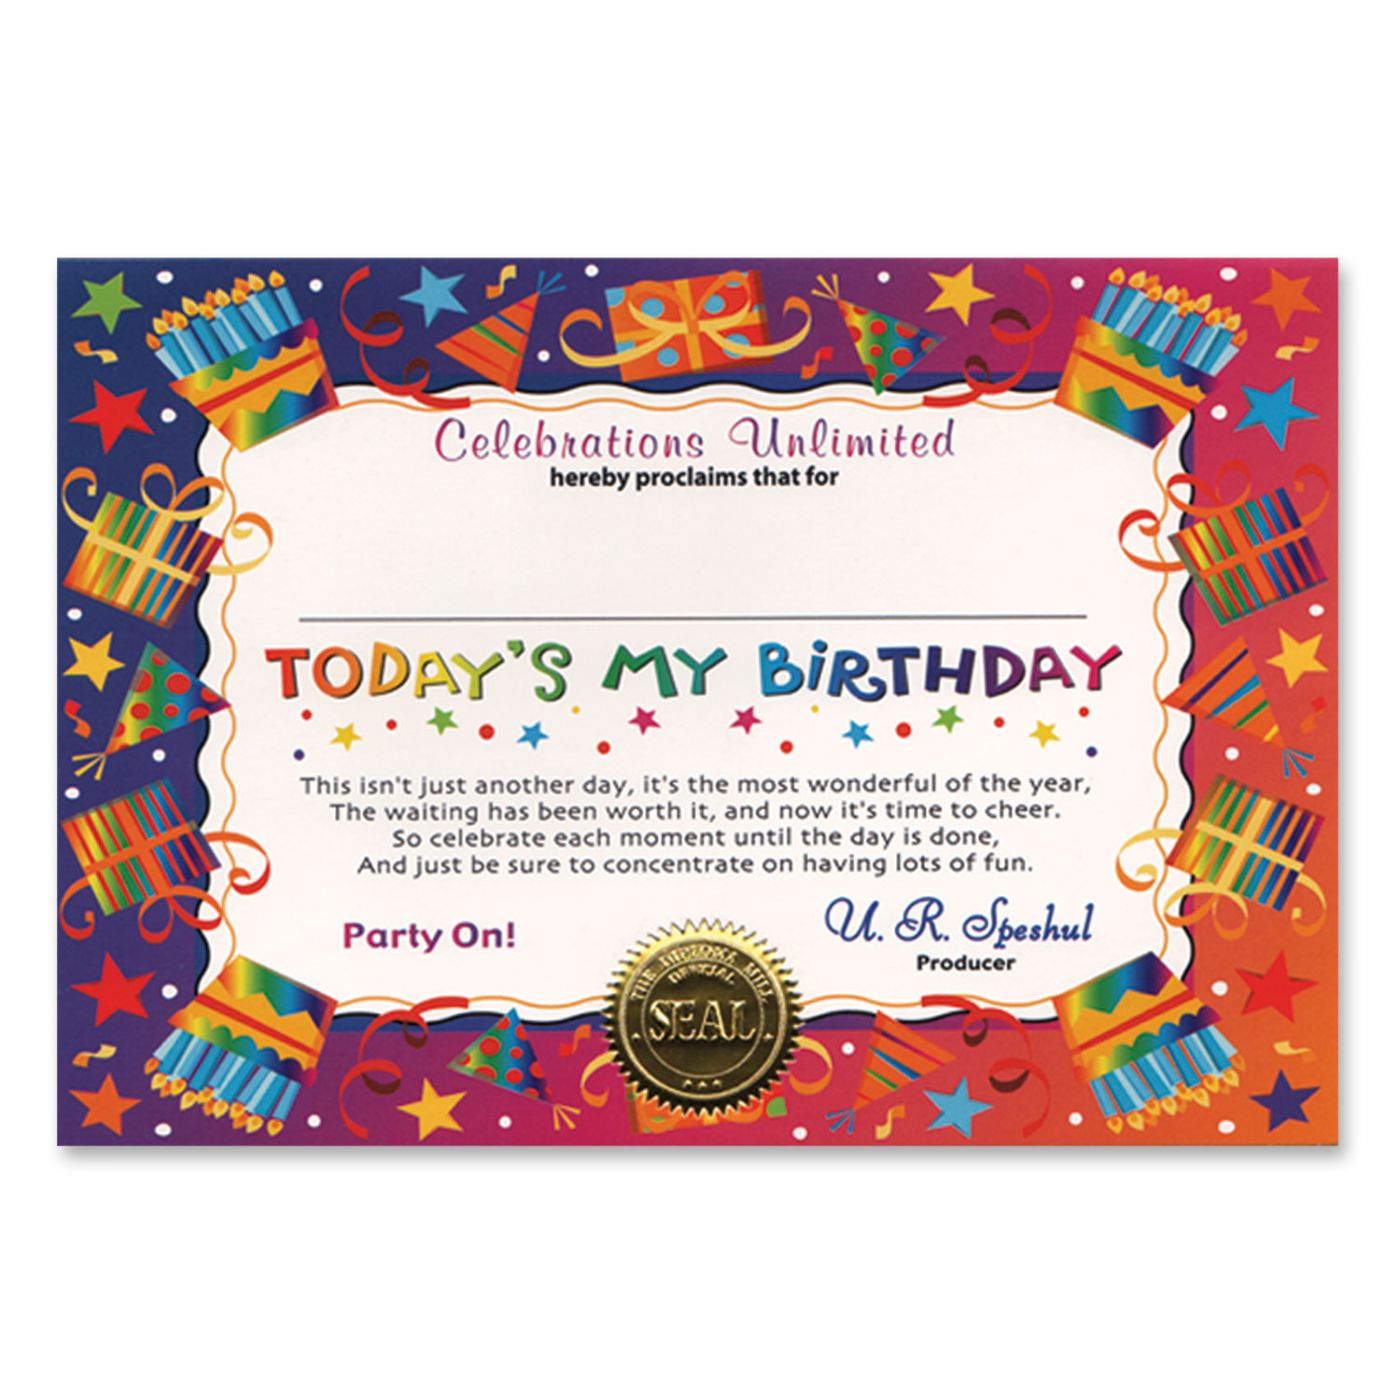 Today's My Birthday Certificate (6) image